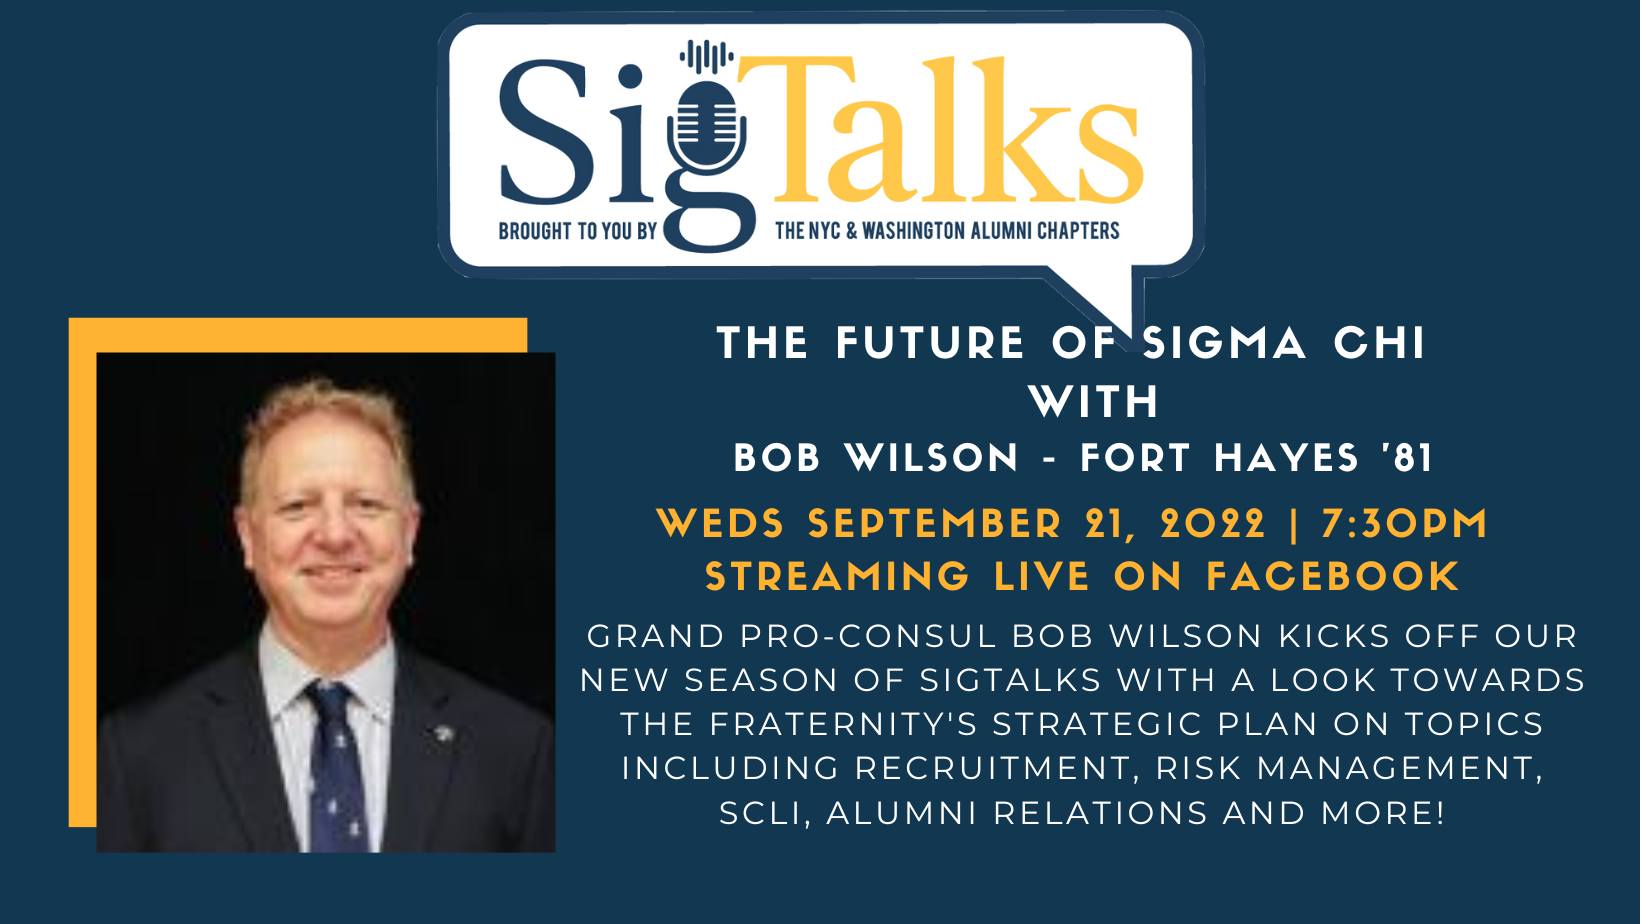 Image for SigTalks: The Future of Sigma Chi with Bob Wilson webinar